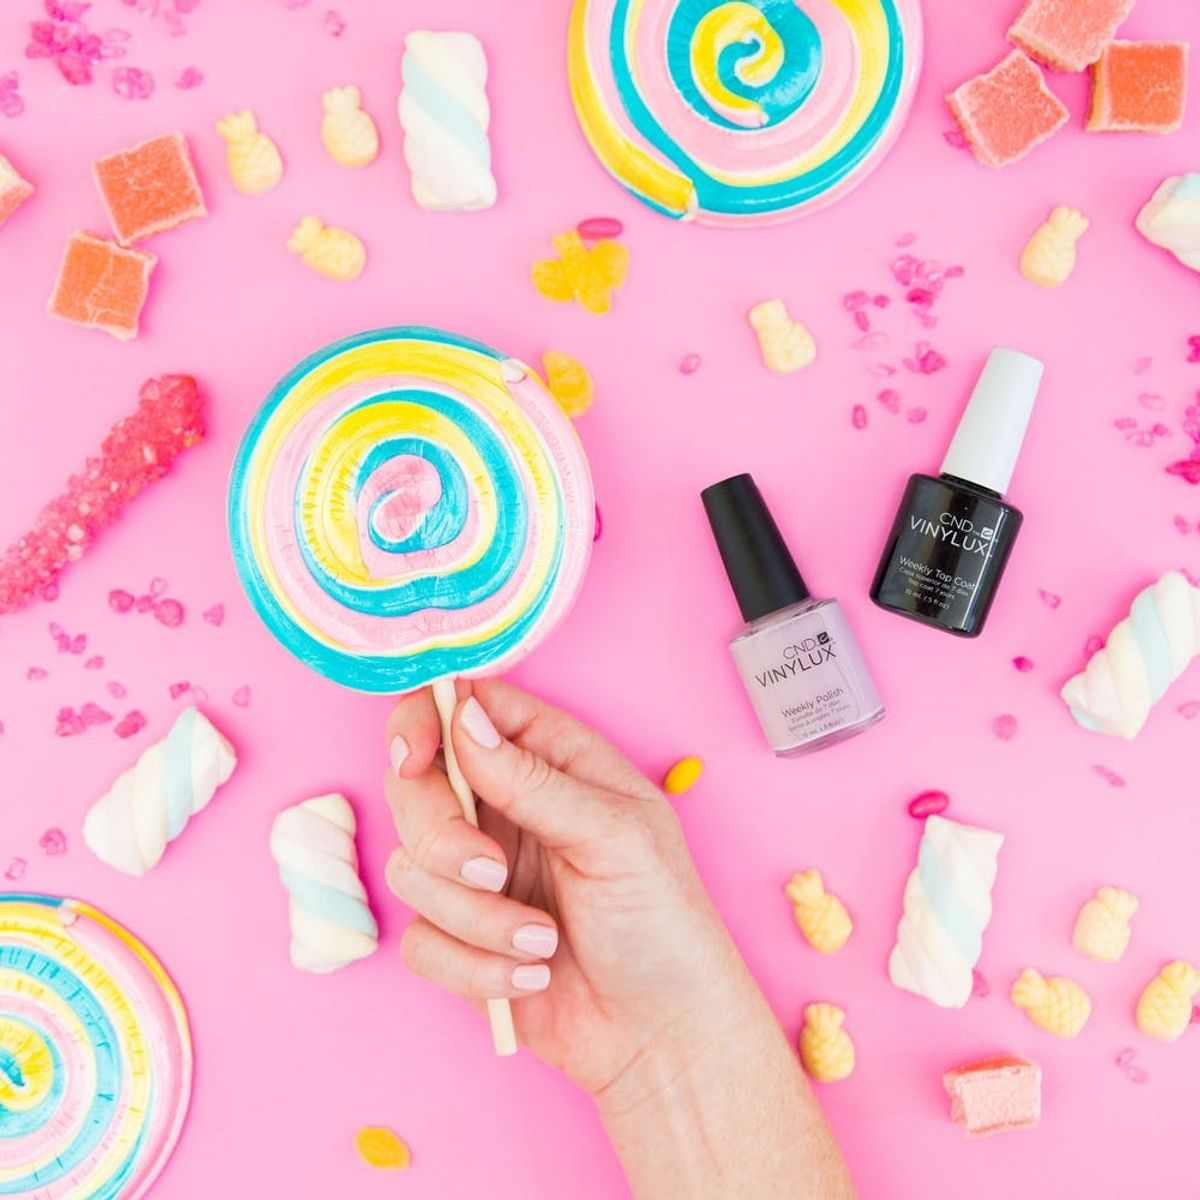 5 Fun Props You Need to Style the Perfect Instagram Photos